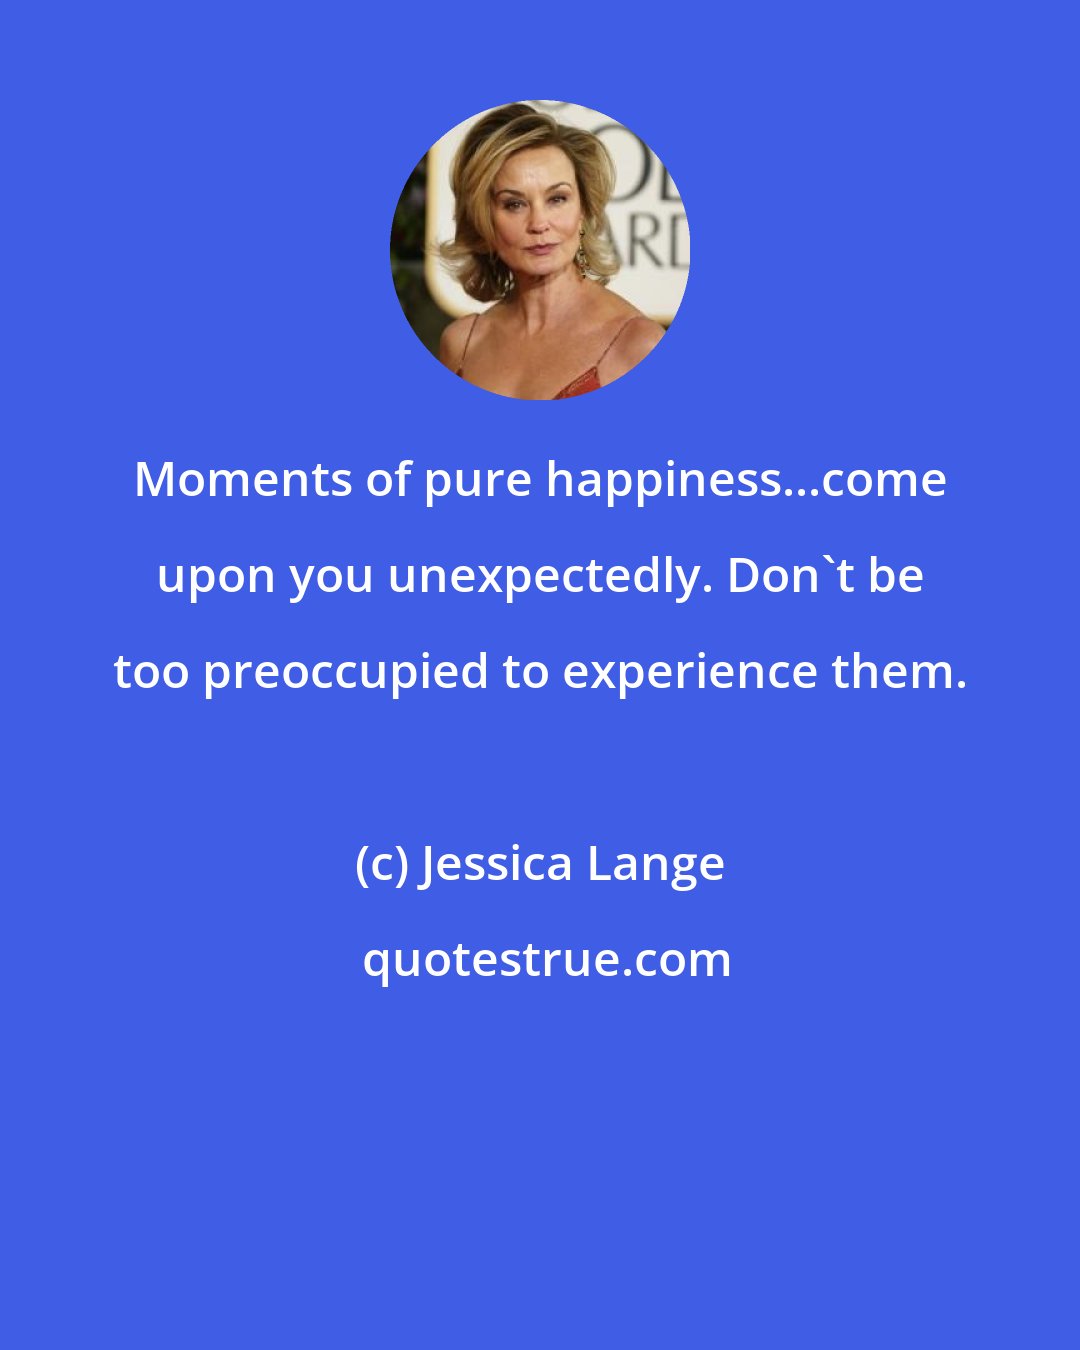 Jessica Lange: Moments of pure happiness...come upon you unexpectedly. Don't be too preoccupied to experience them.